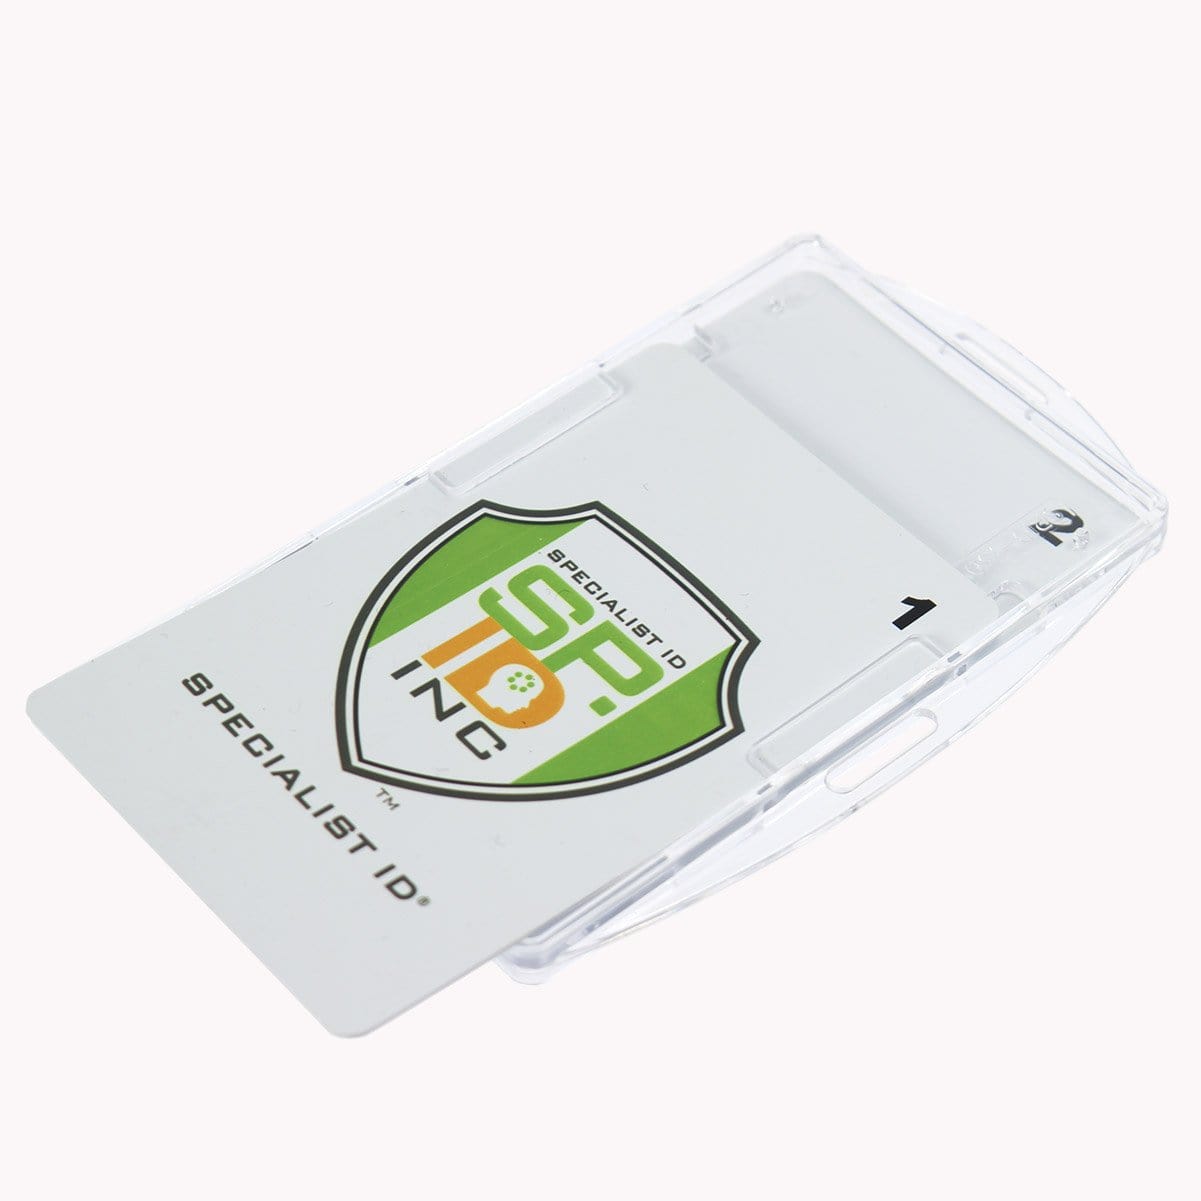 Crystal Clear Rigid Open-Faced 2 Card Holder - Optional Vertical or Horizontal (P/N SPID-150) SPID-150-CRYSTALCLEAR